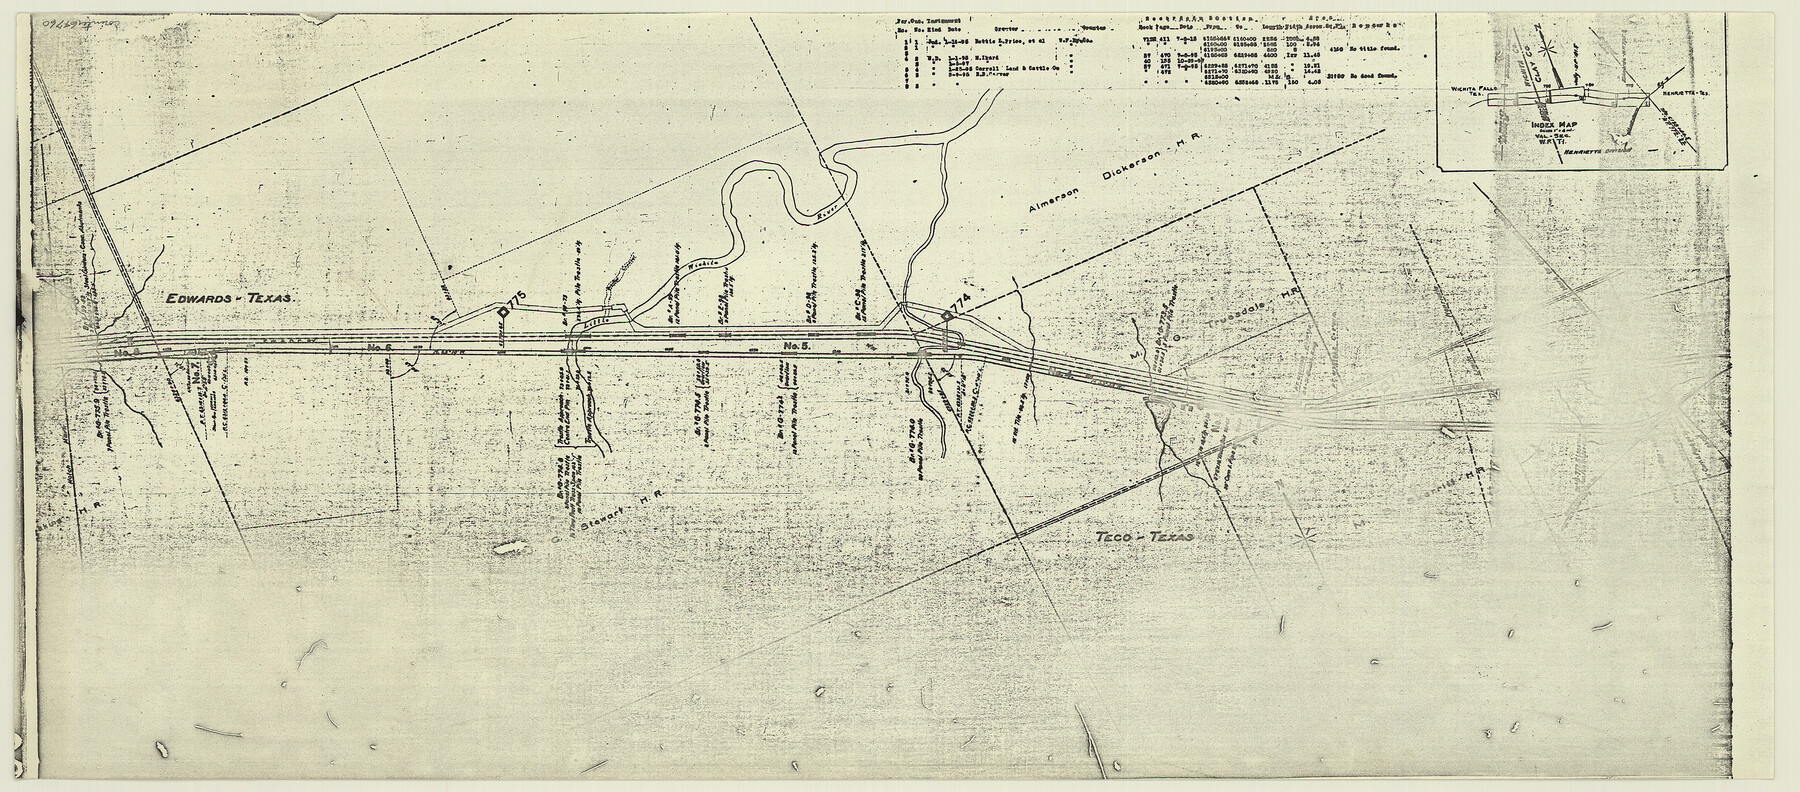 64760, [Right of Way and Track Map, the Missouri, Kansas and Texas Ry. of Texas - Henrietta Division], General Map Collection